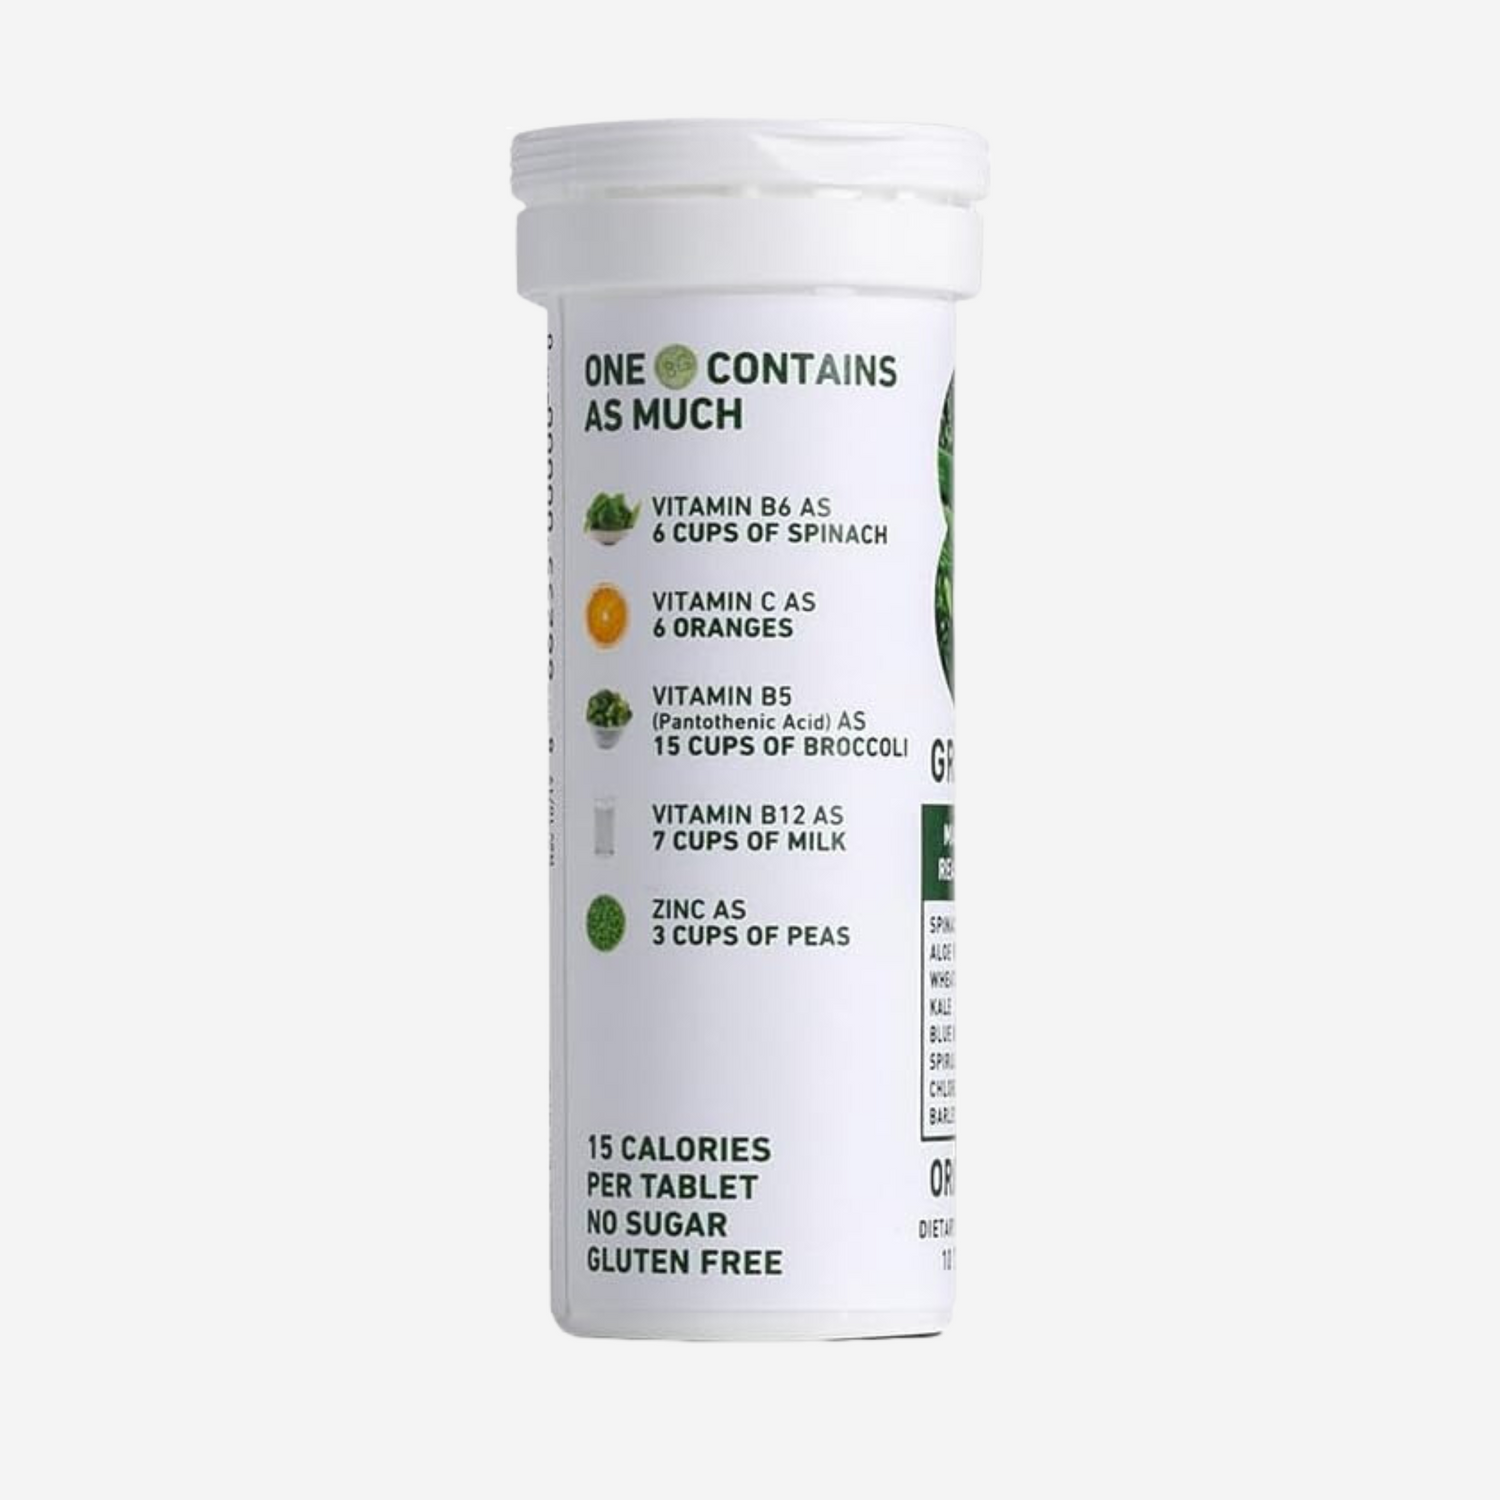 8Greens Daily Greens Effervescent Tablets - Superfood Booster, Energy & Immune Support 30 Tablets